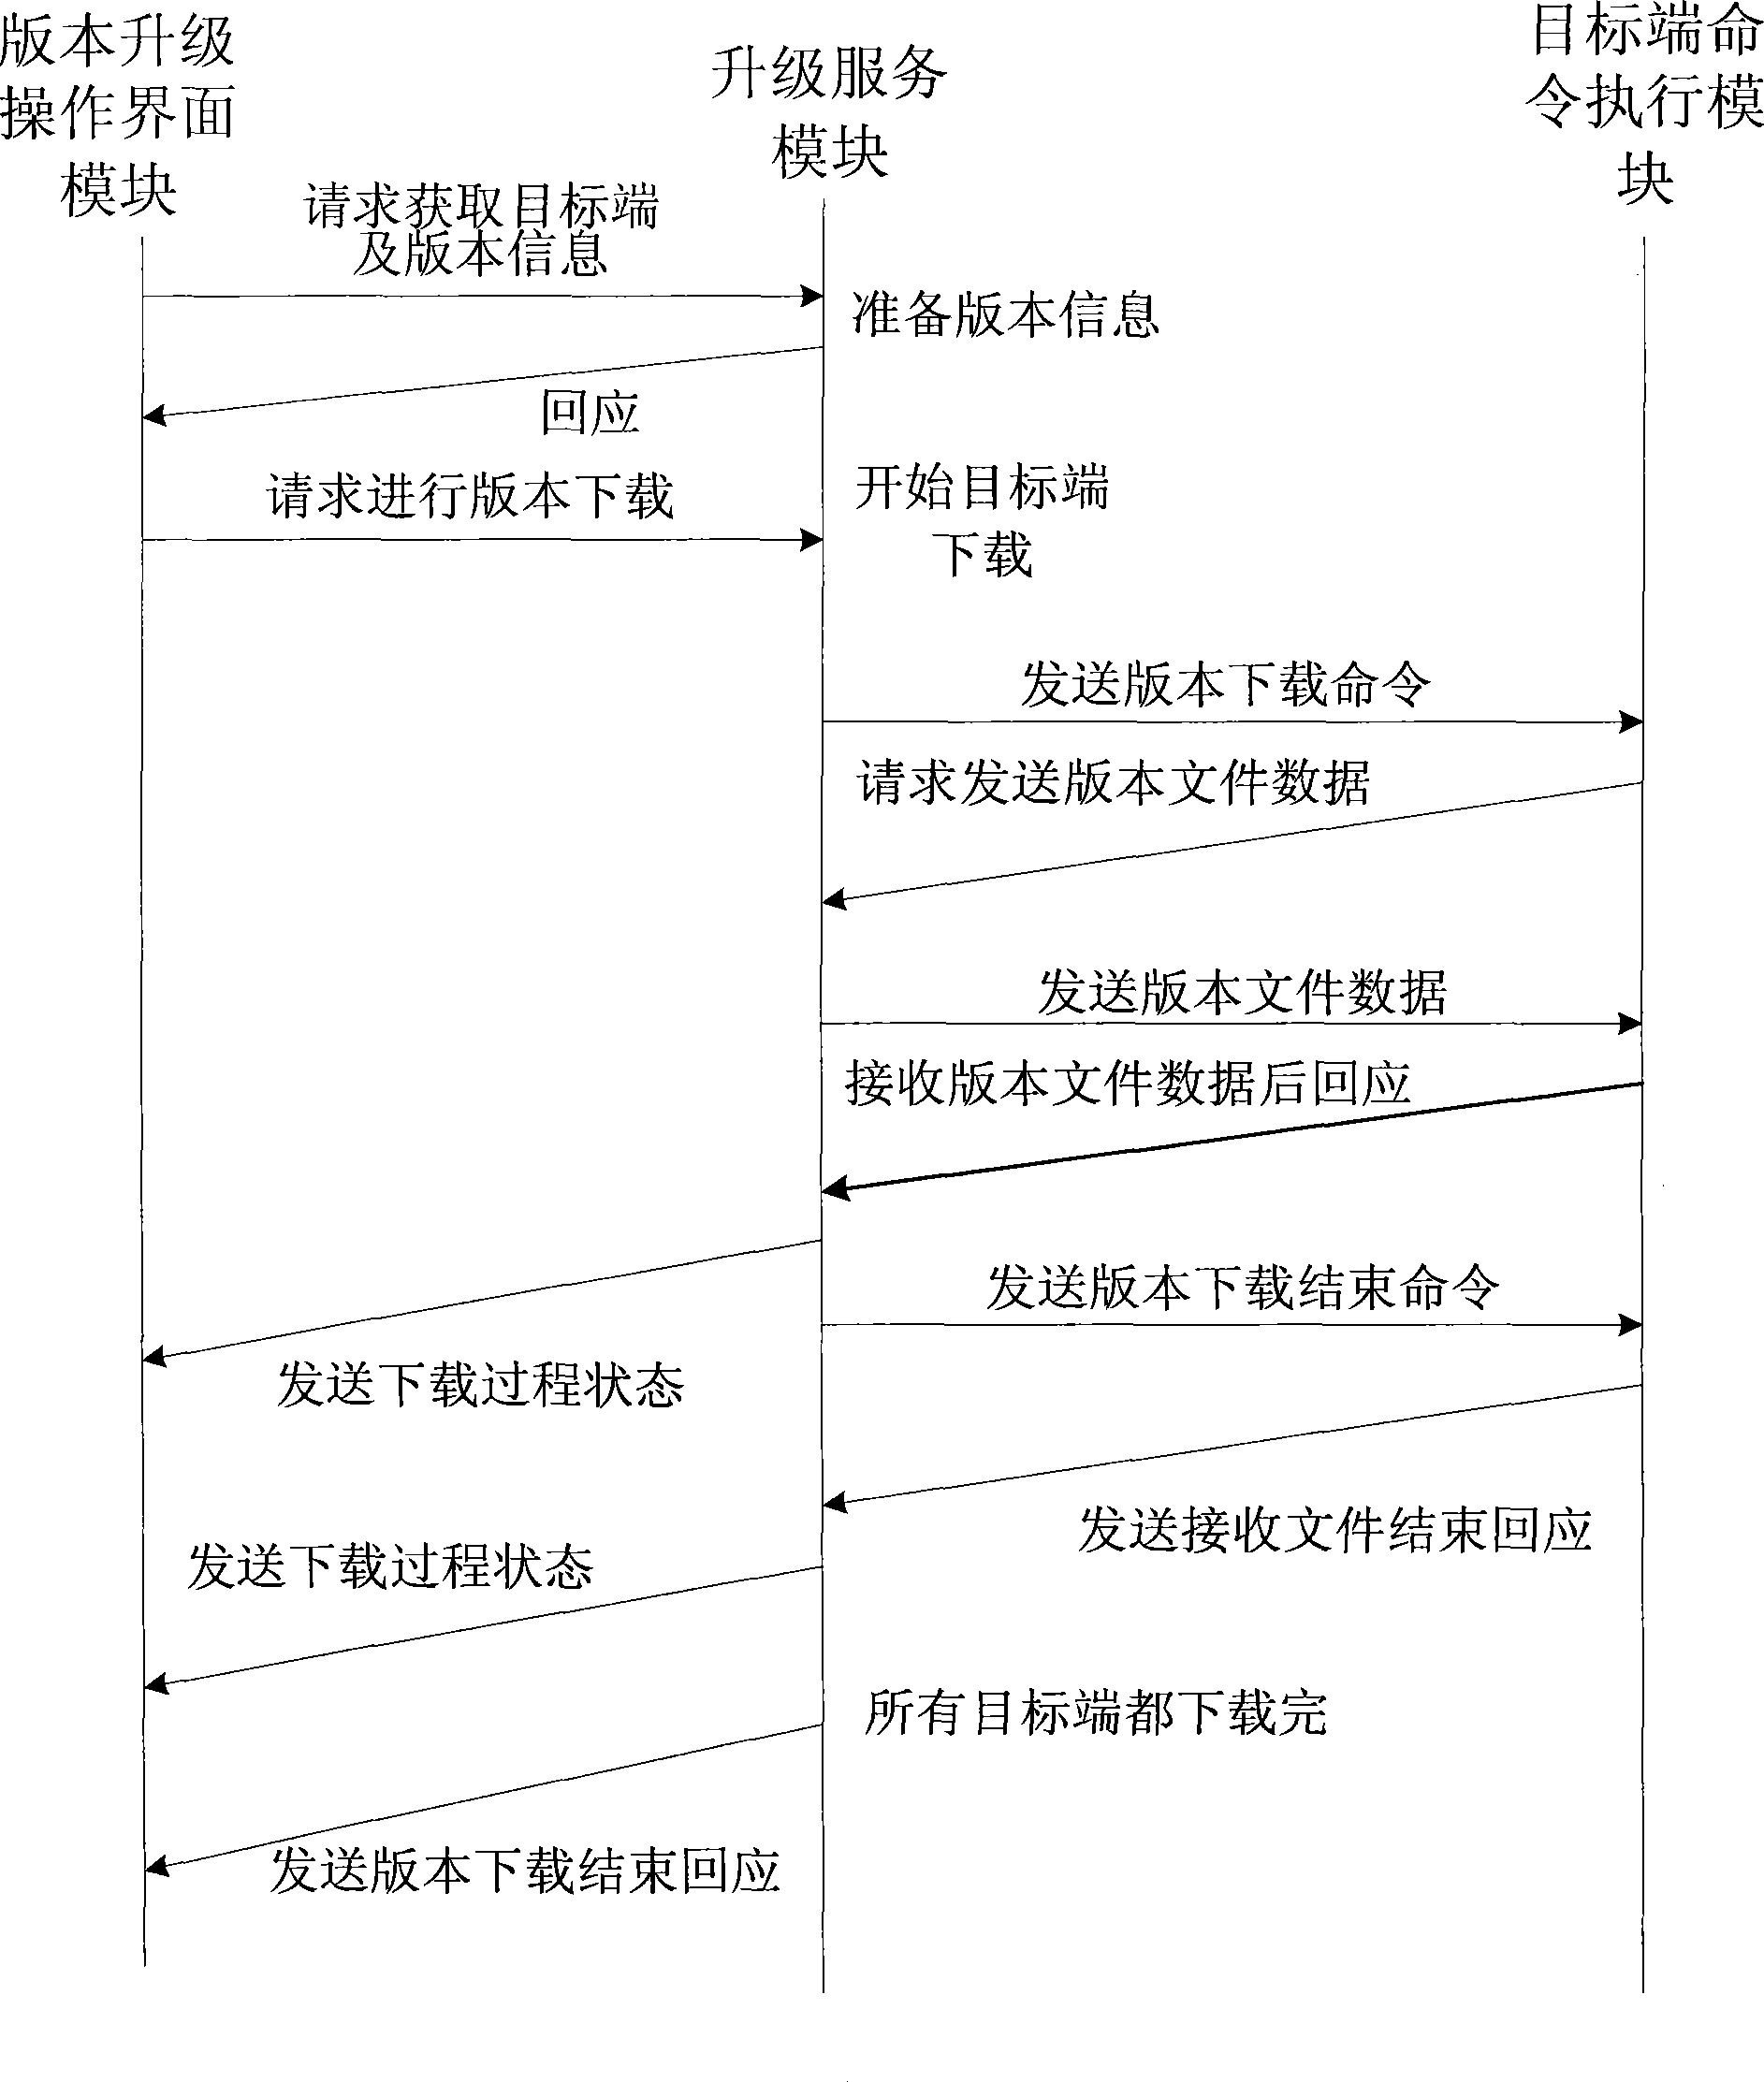 Automatic upgrading method and system for switch remote target terminal